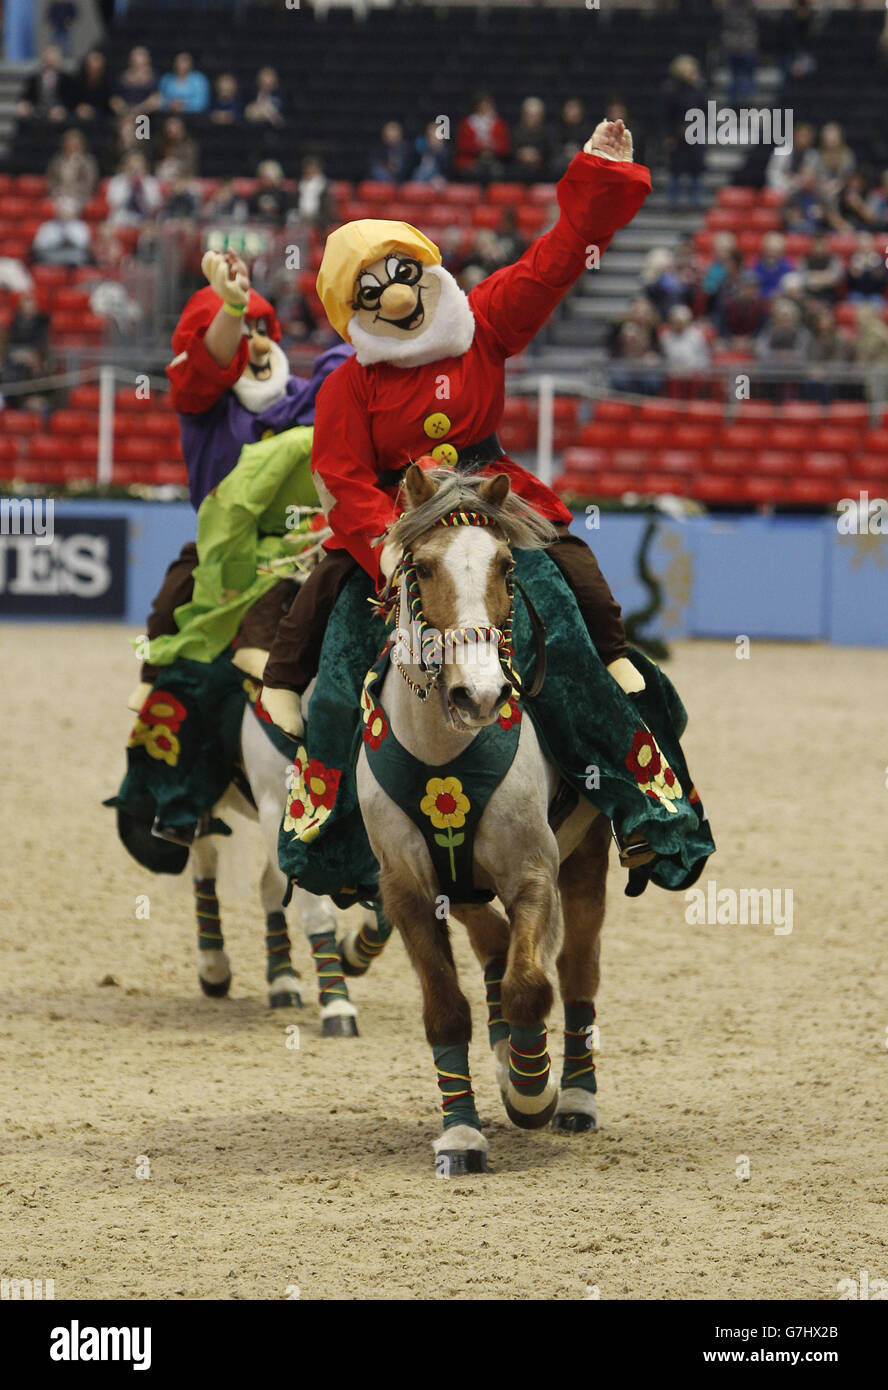 Members of the Saffron Walden & District Riding Club dress a the seven Dwarfs as they compete in the SEIB/British Riding Clubs Quadrille of the Year during day six of the Olympia London International Horse Show at the Olympia Exhibition Centre, London. Stock Photo